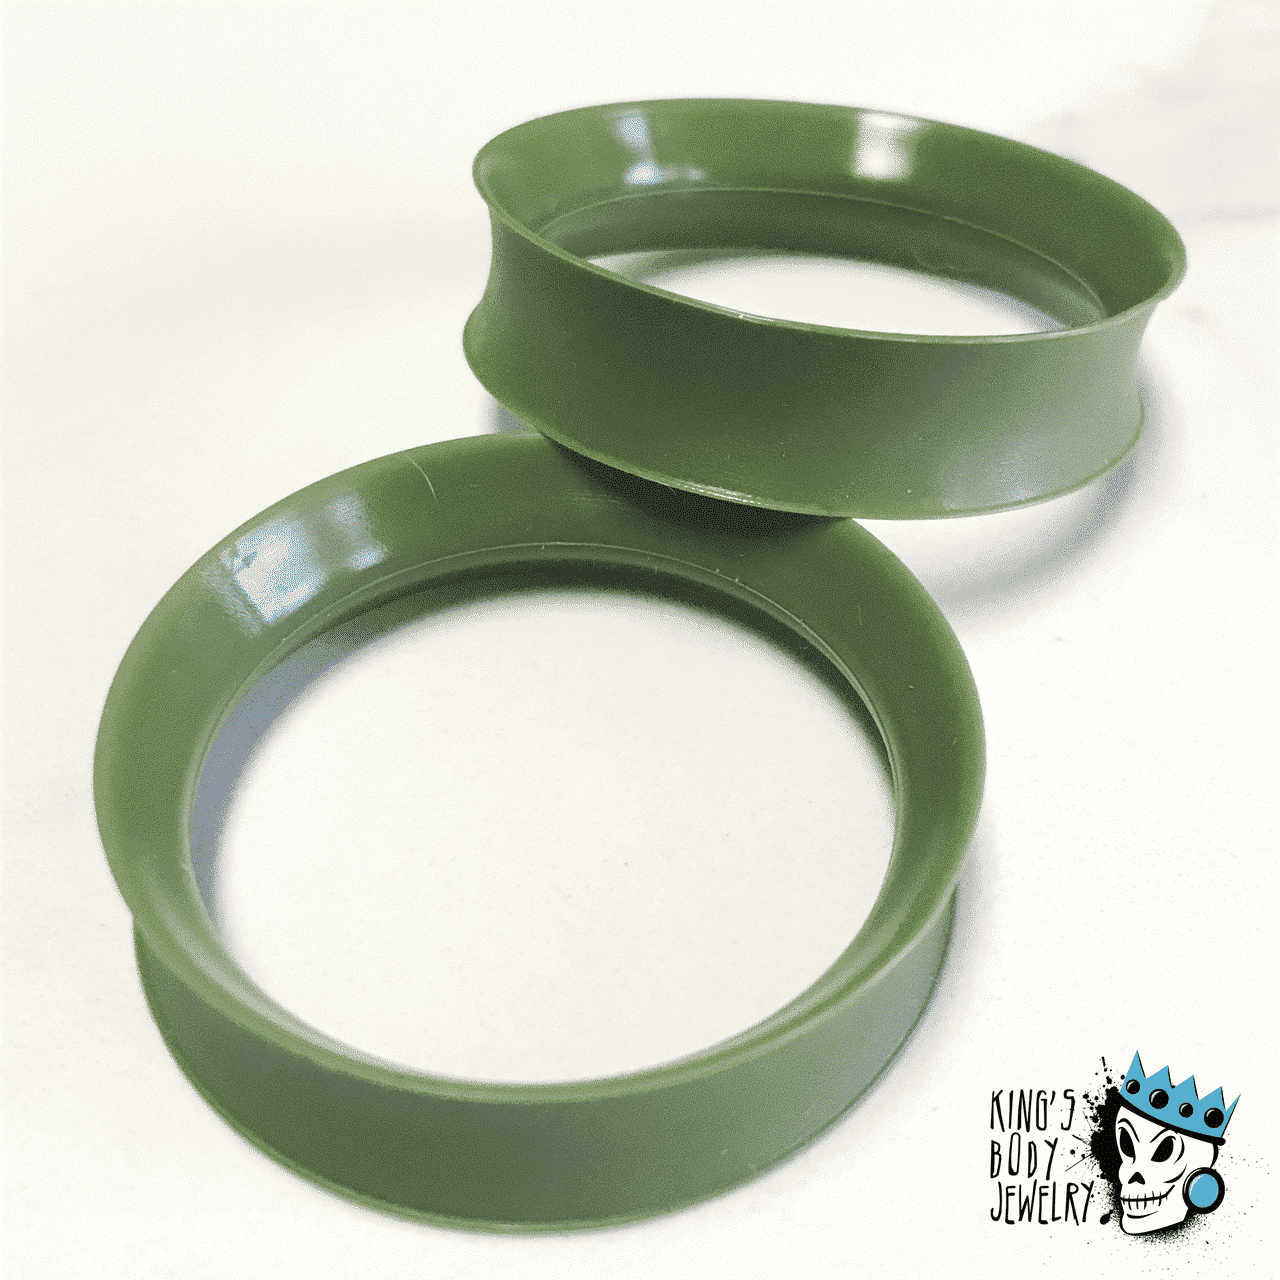 KAOS Skin Eyelets - Exclusive Colors (7/8 inch - 1 7/8 inch)